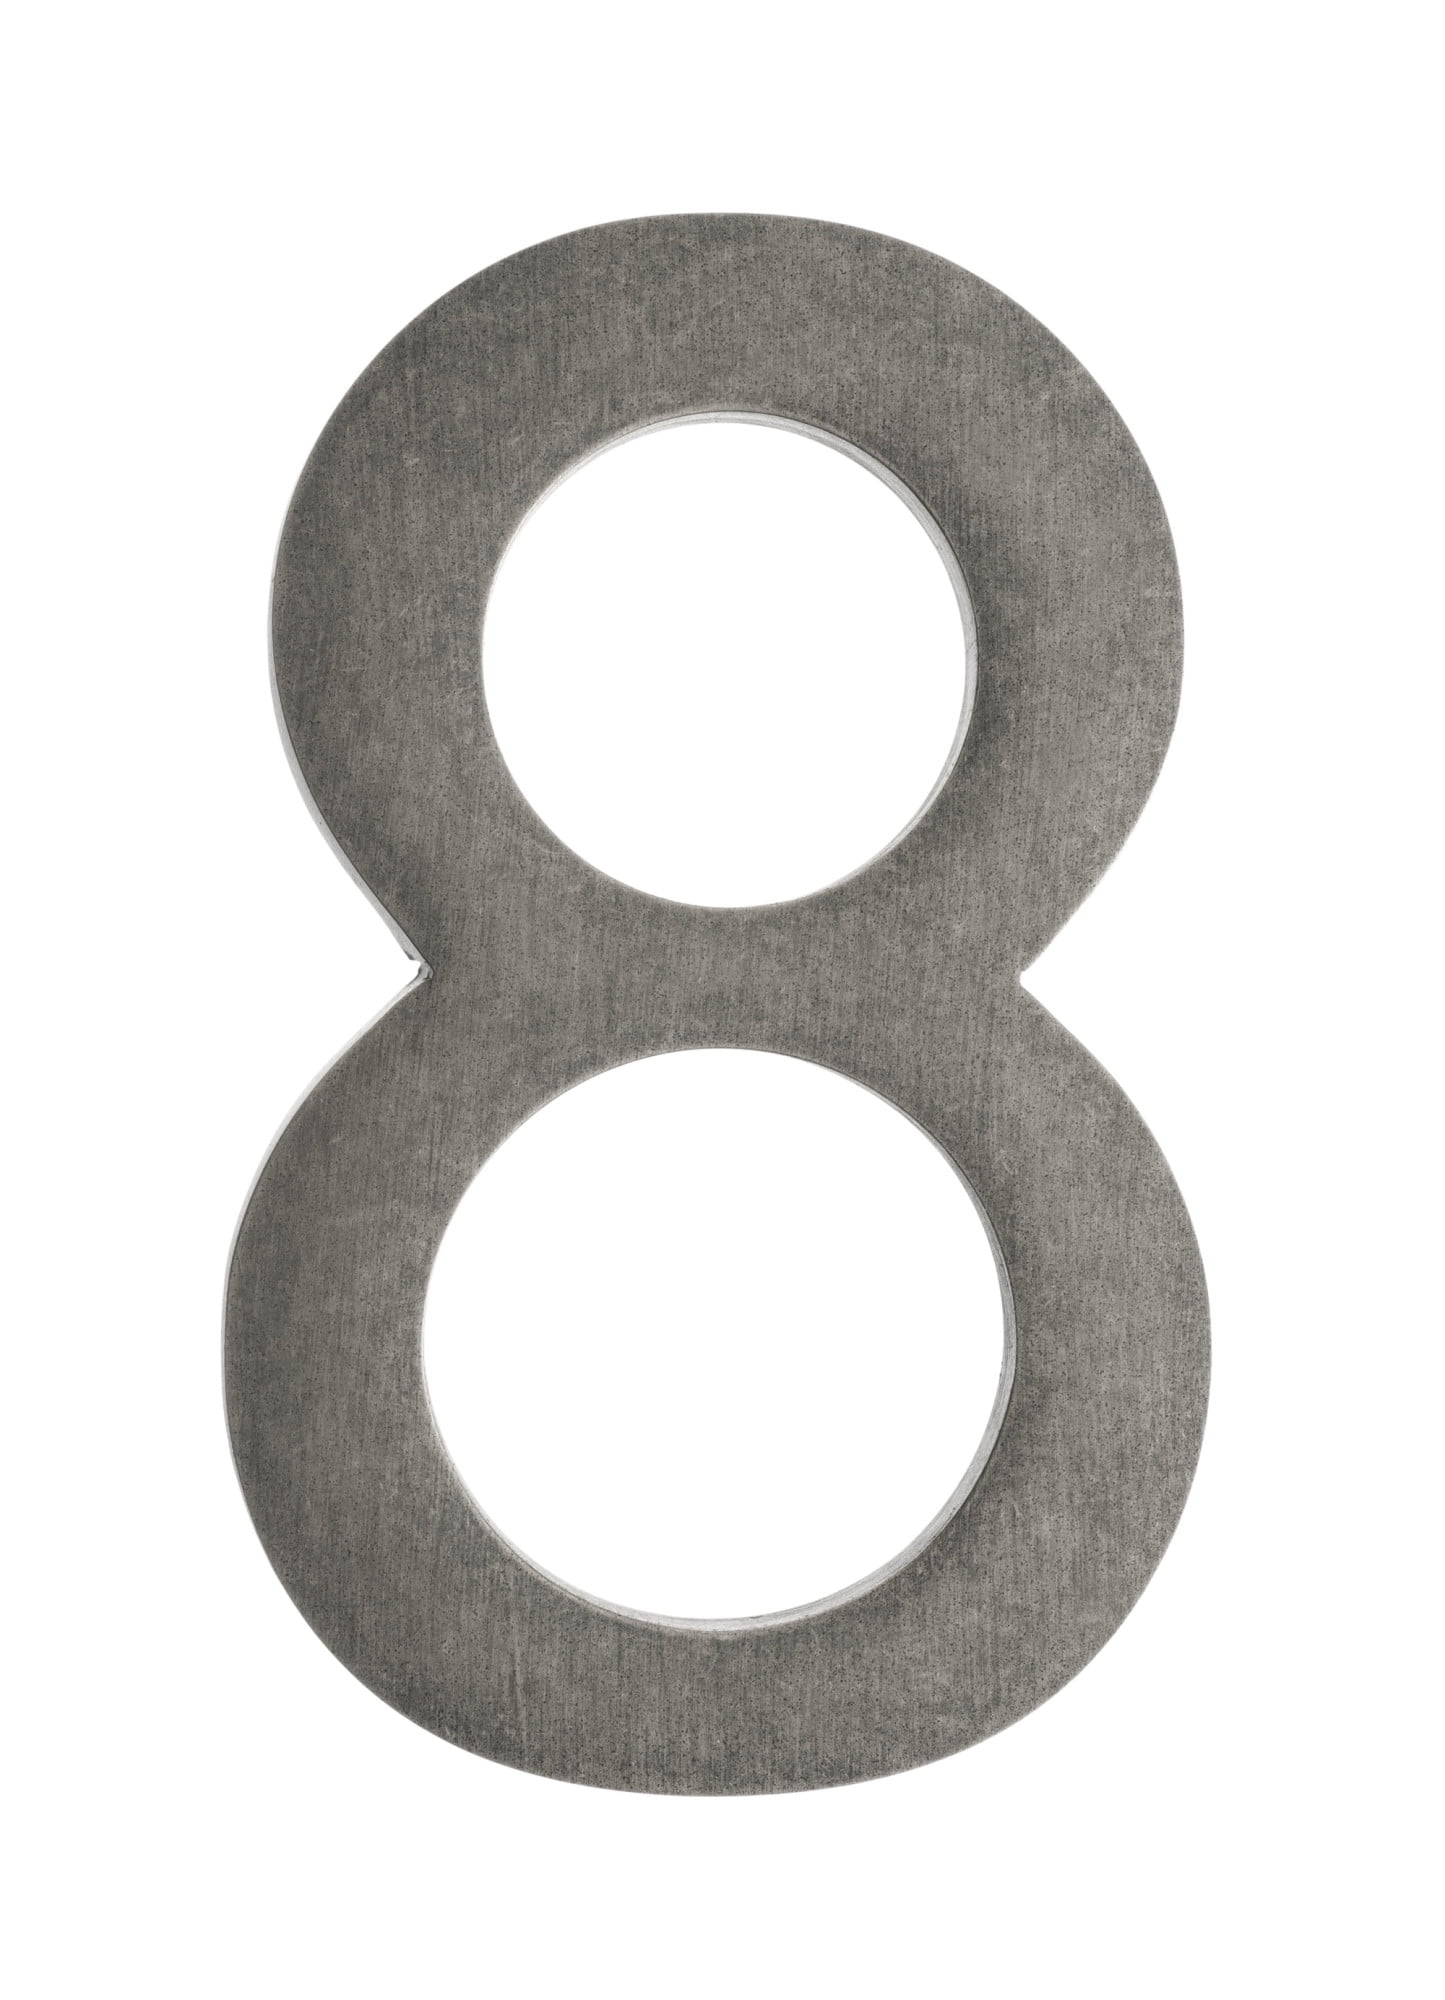 3585apa-8 Floating House Number 8, Antique Pewter - 5 In.